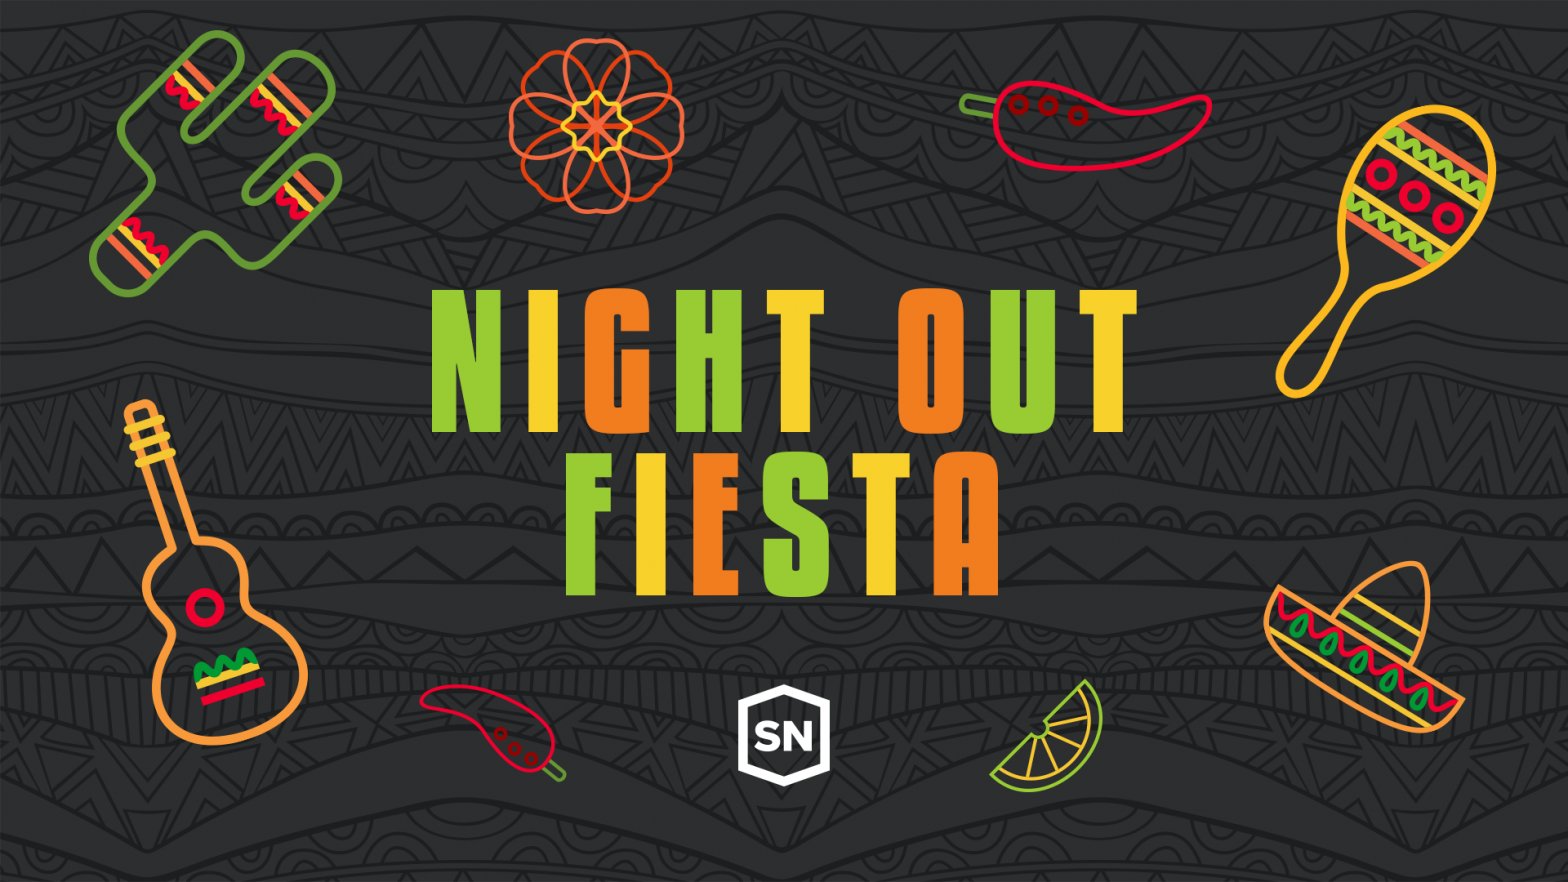 Night Out Fiesta event image